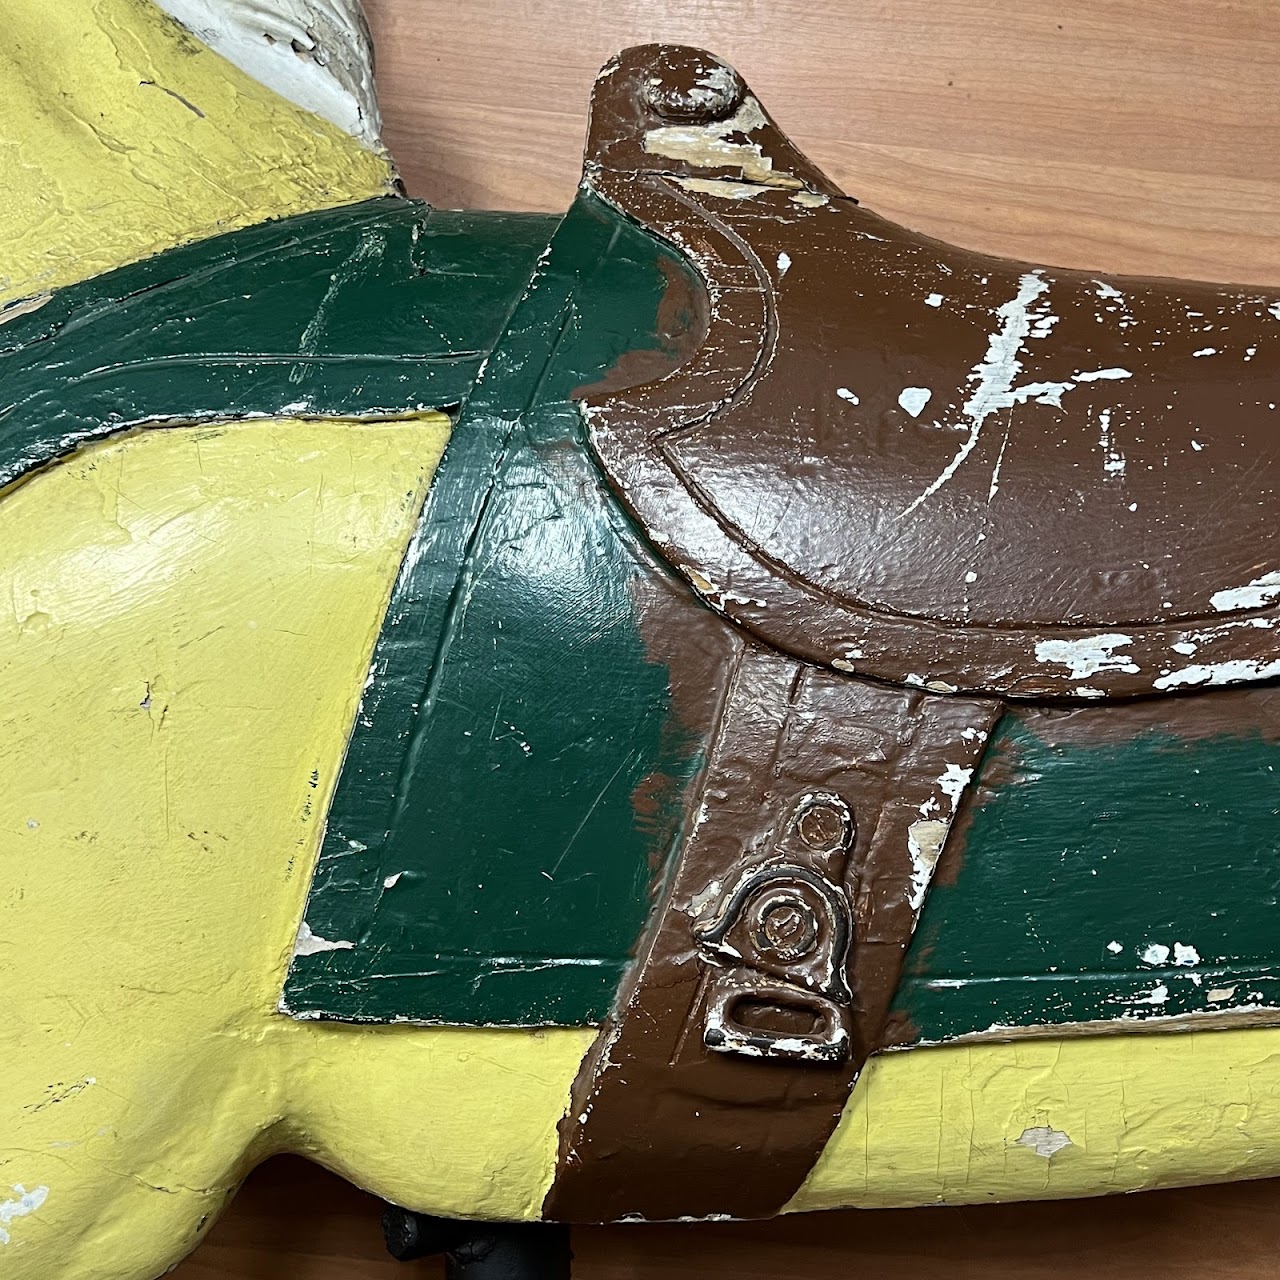 Antique Hand Carved and Painted Jumping Carousel Horse